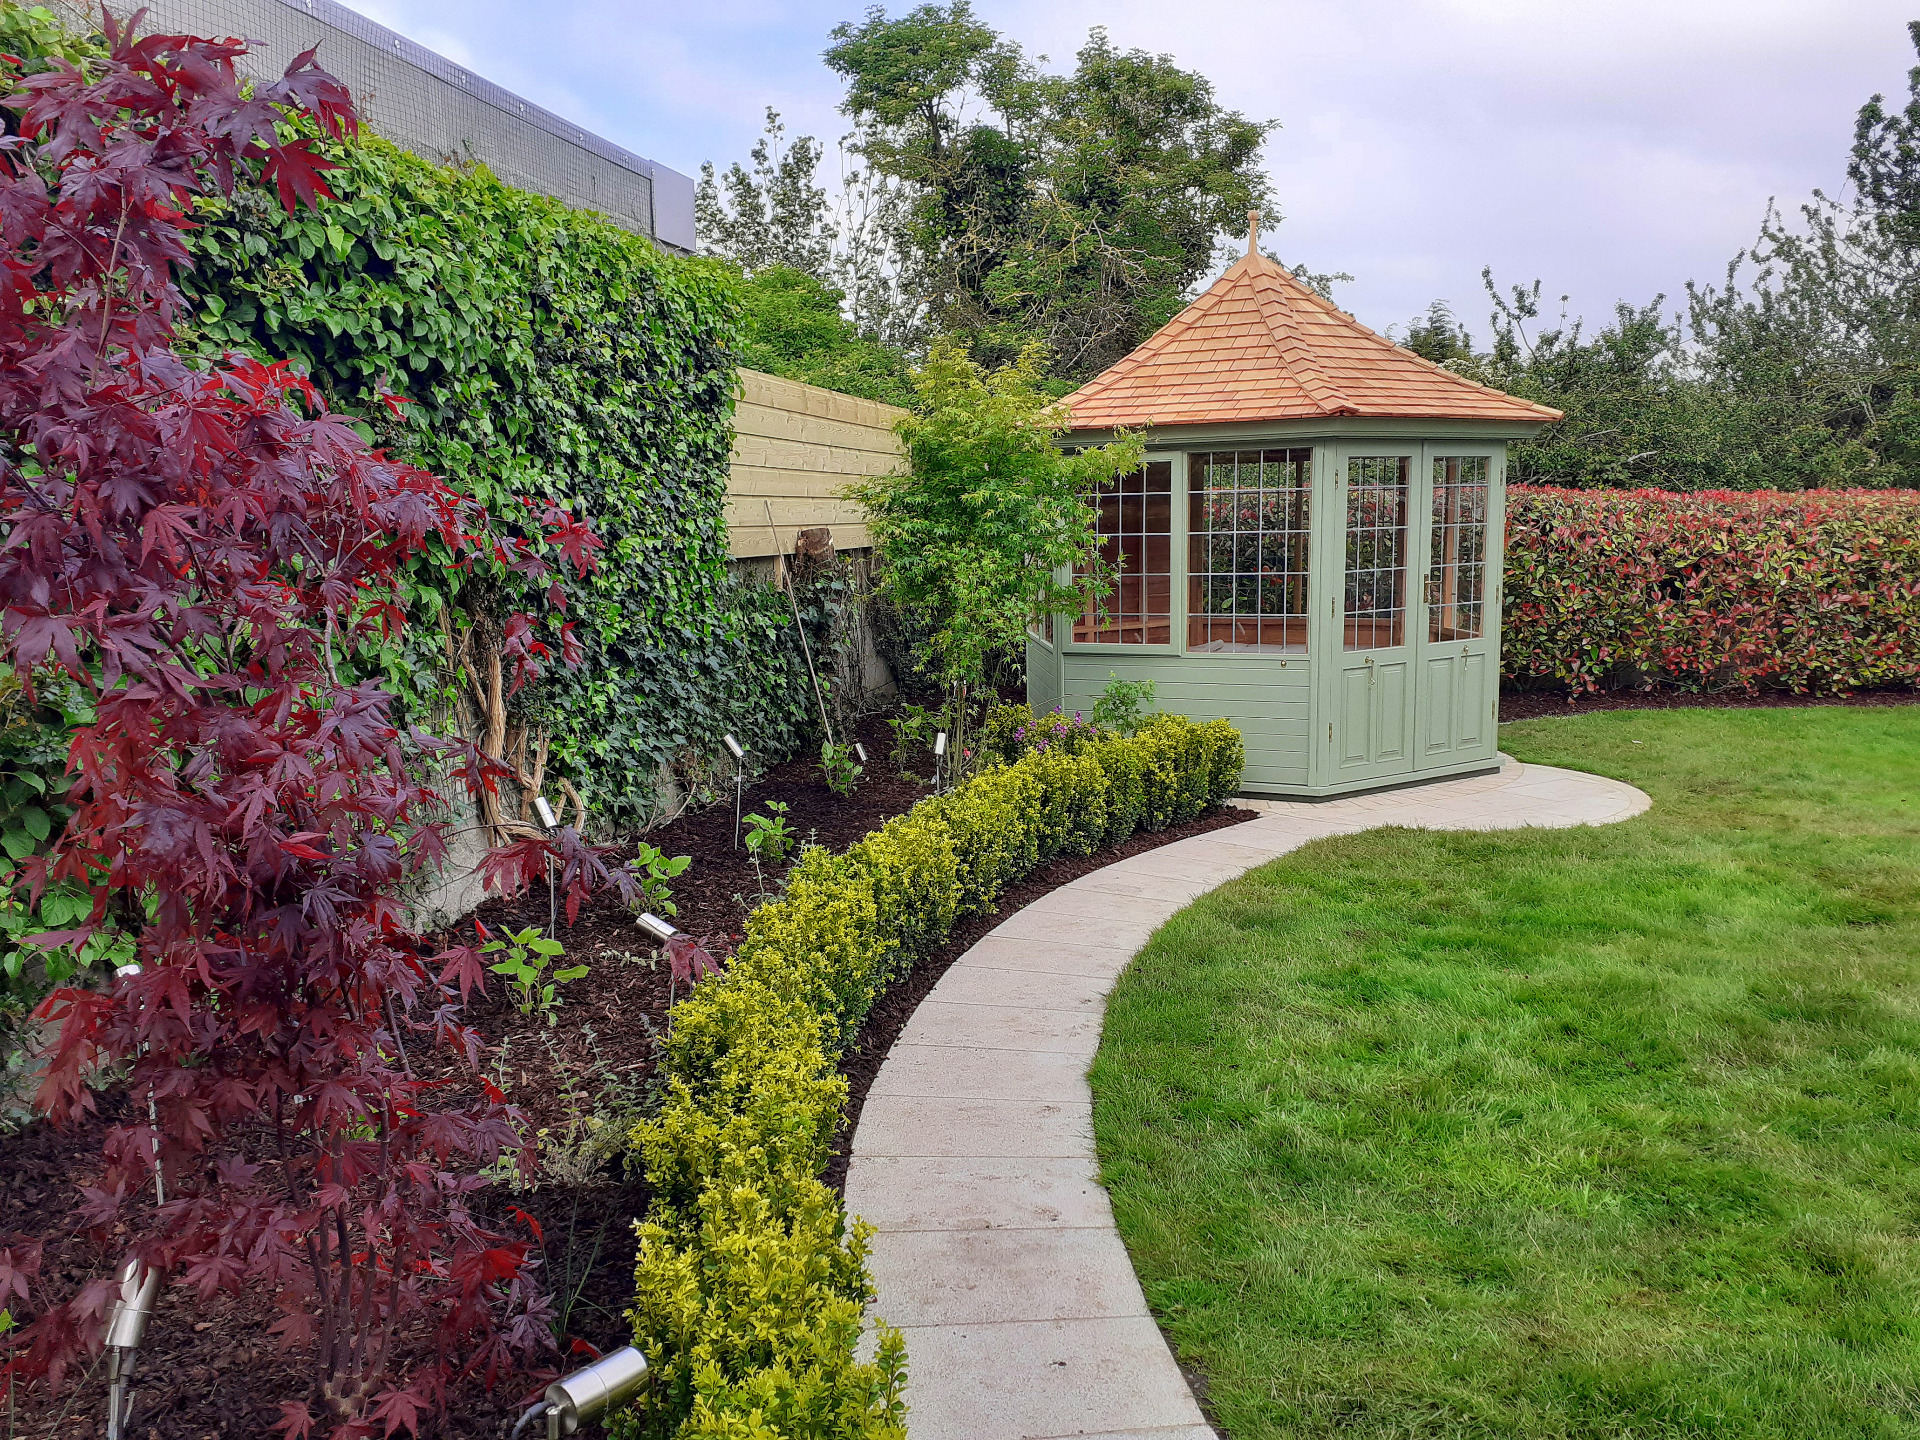 3.0m six sided Victorian Summerhouse in Western Red Cedar with painted (Willow) | The stylish solution to comfortably enjoy peace and calm in your garden